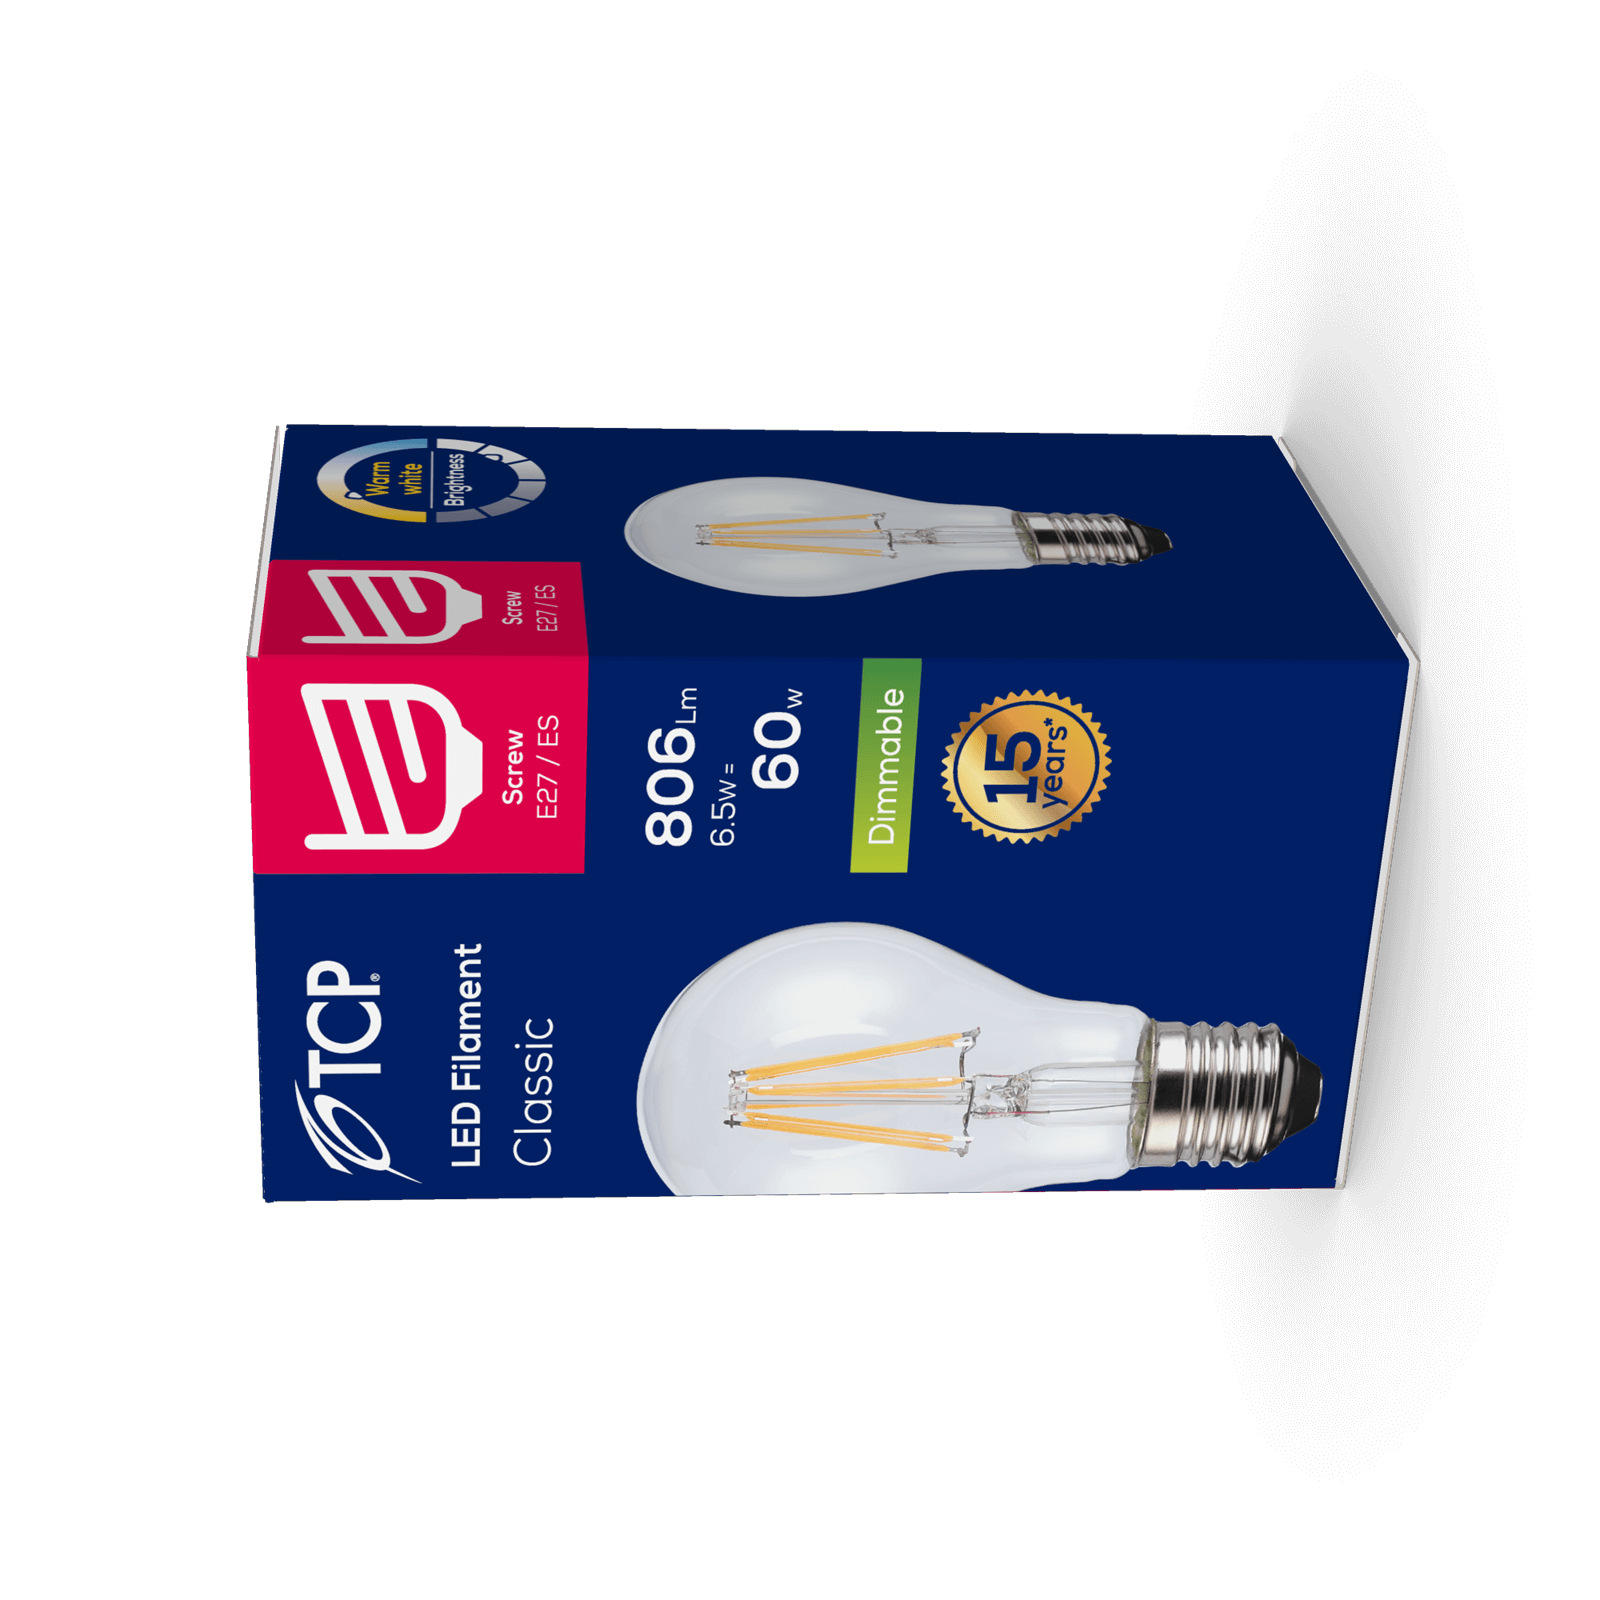 TCP LED Filament Clear Classic 7W ES Dimmable Light Bulb